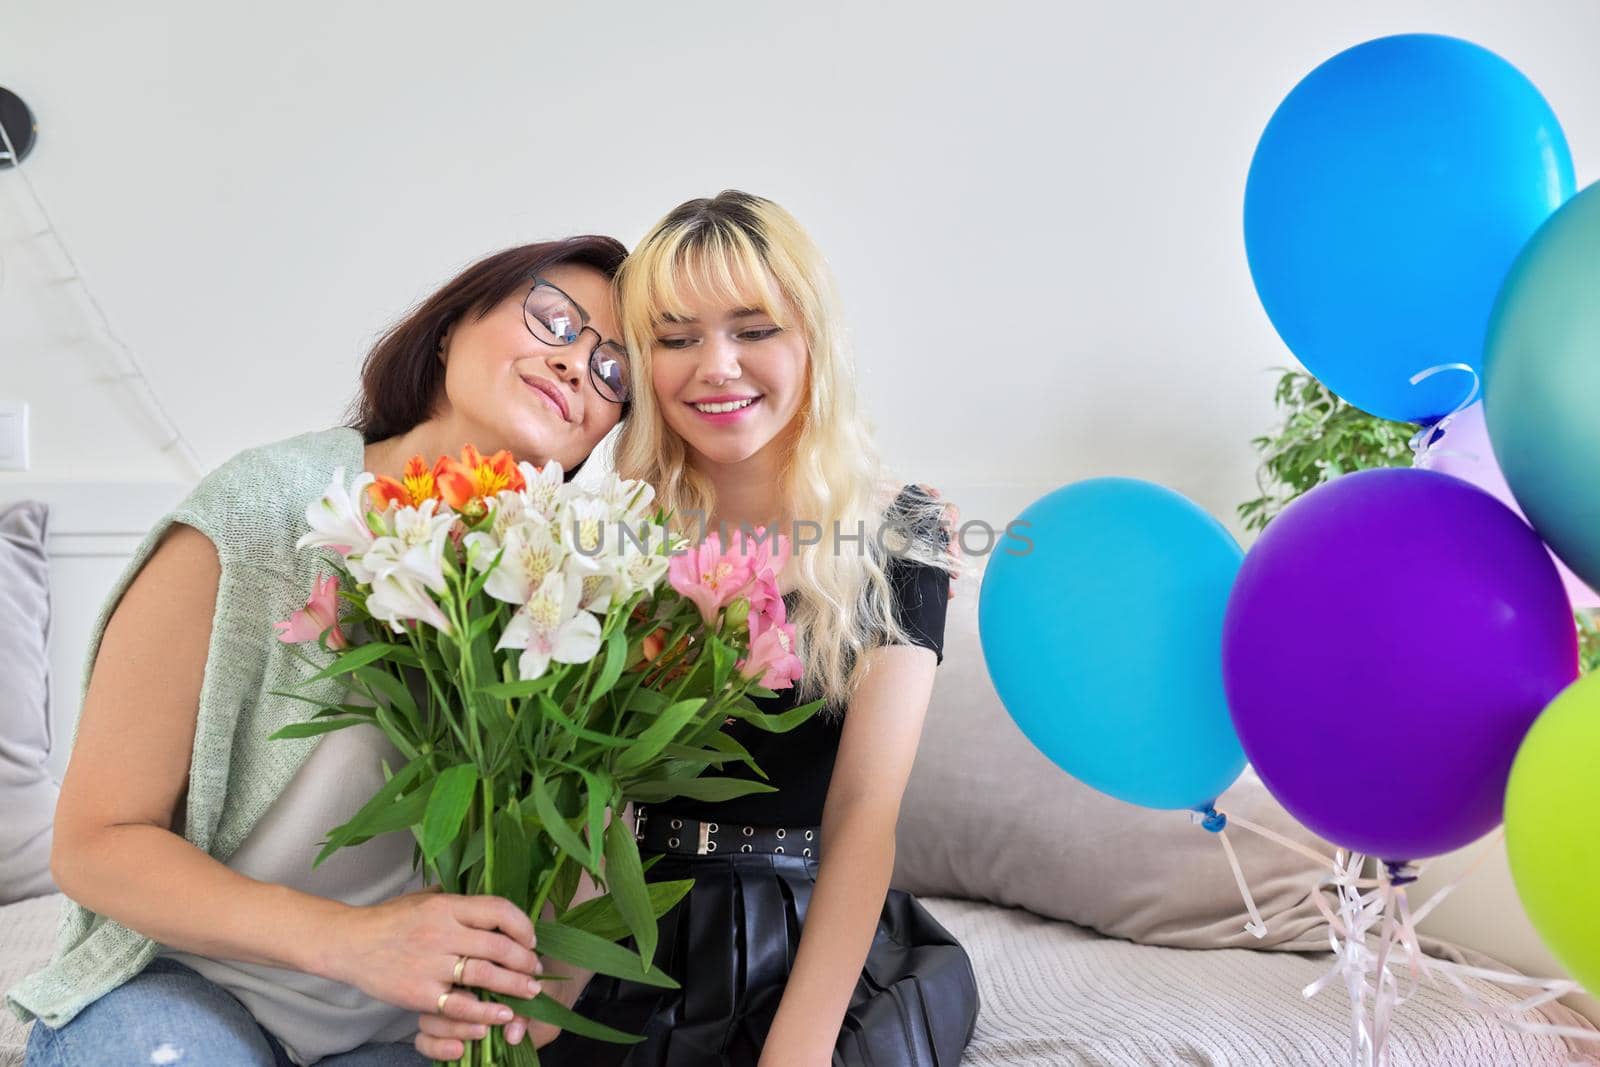 Portrait of happy smiling mom and teenage daughter, birthday celebration, women with bouquet of flowers colored balloons. Holiday, birthday, parent teenager relationship concept